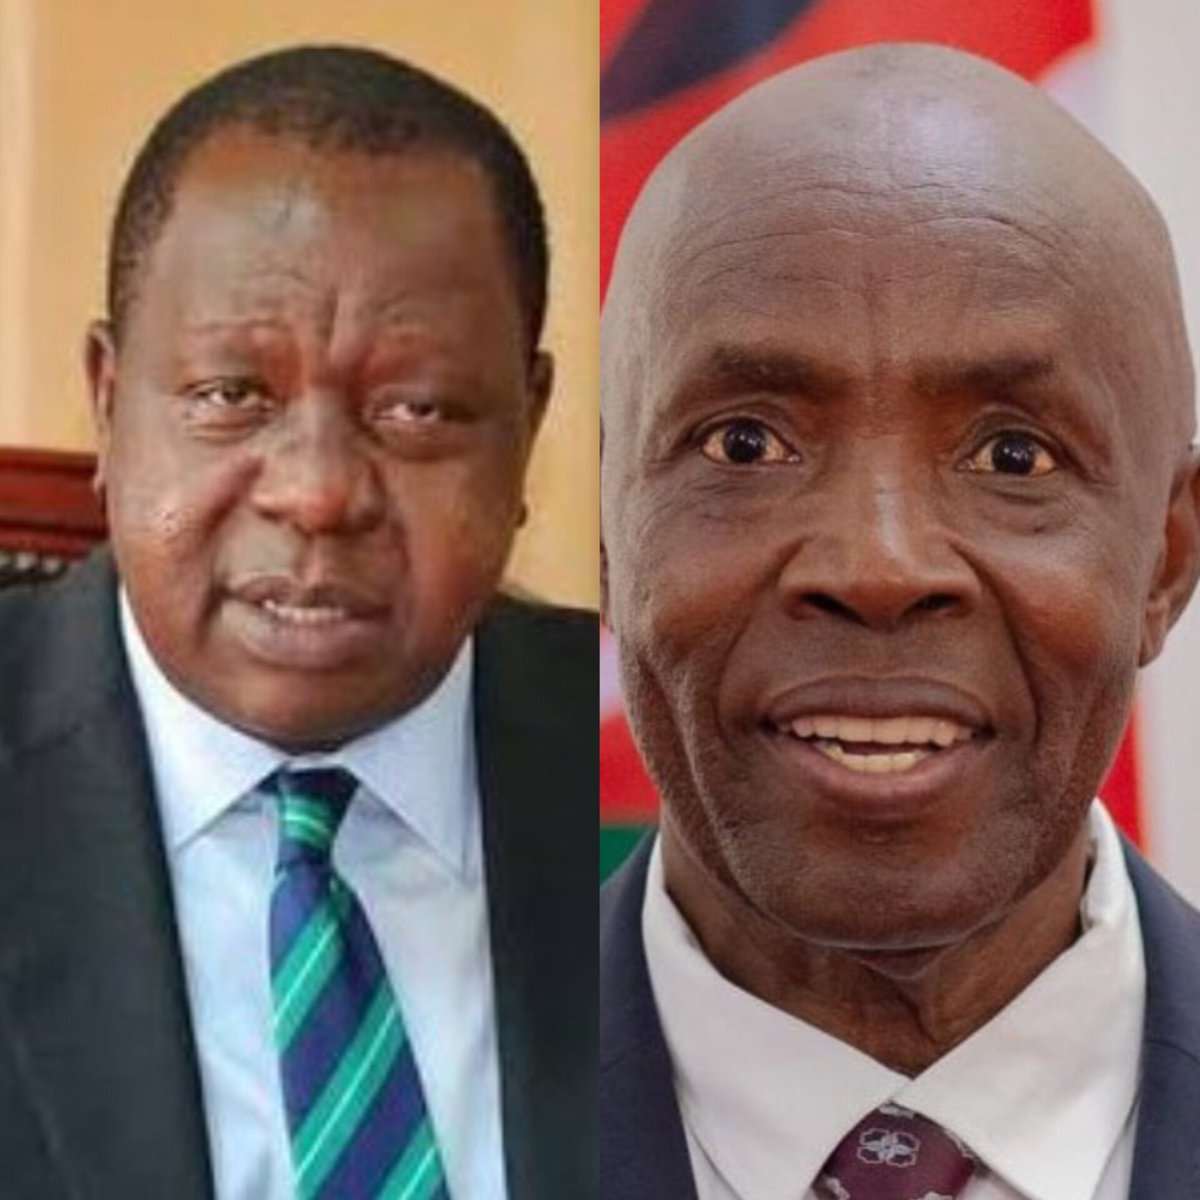 Who was the best Education CS, Like for CS Matiang'i and Retweet for CS Machogu